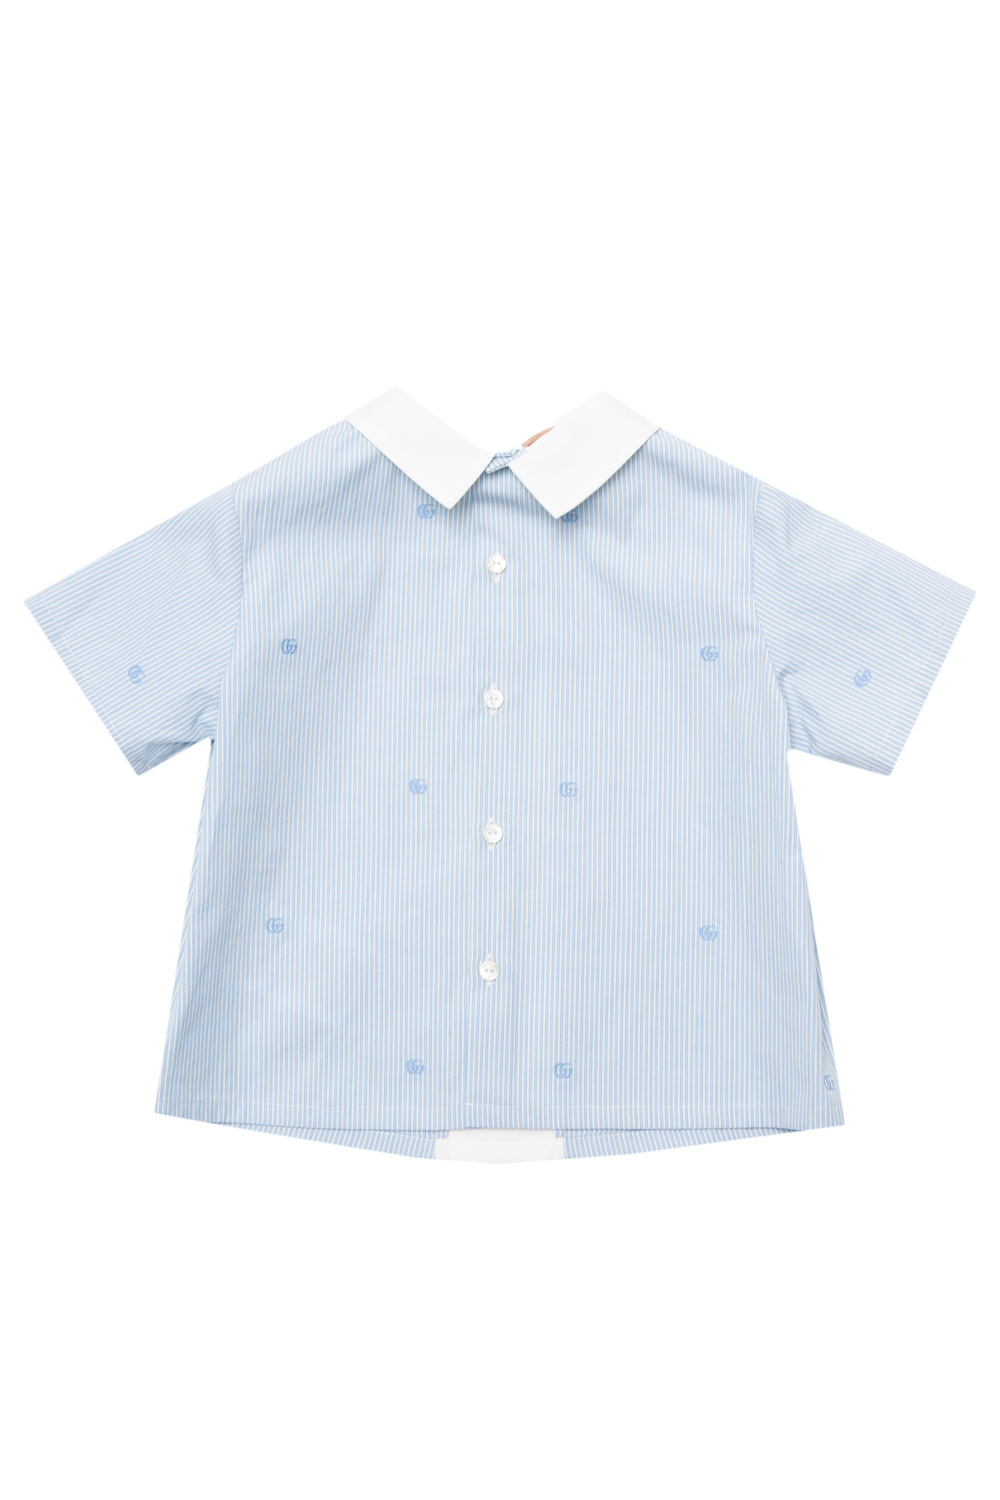 Gucci Kids Embroidered top